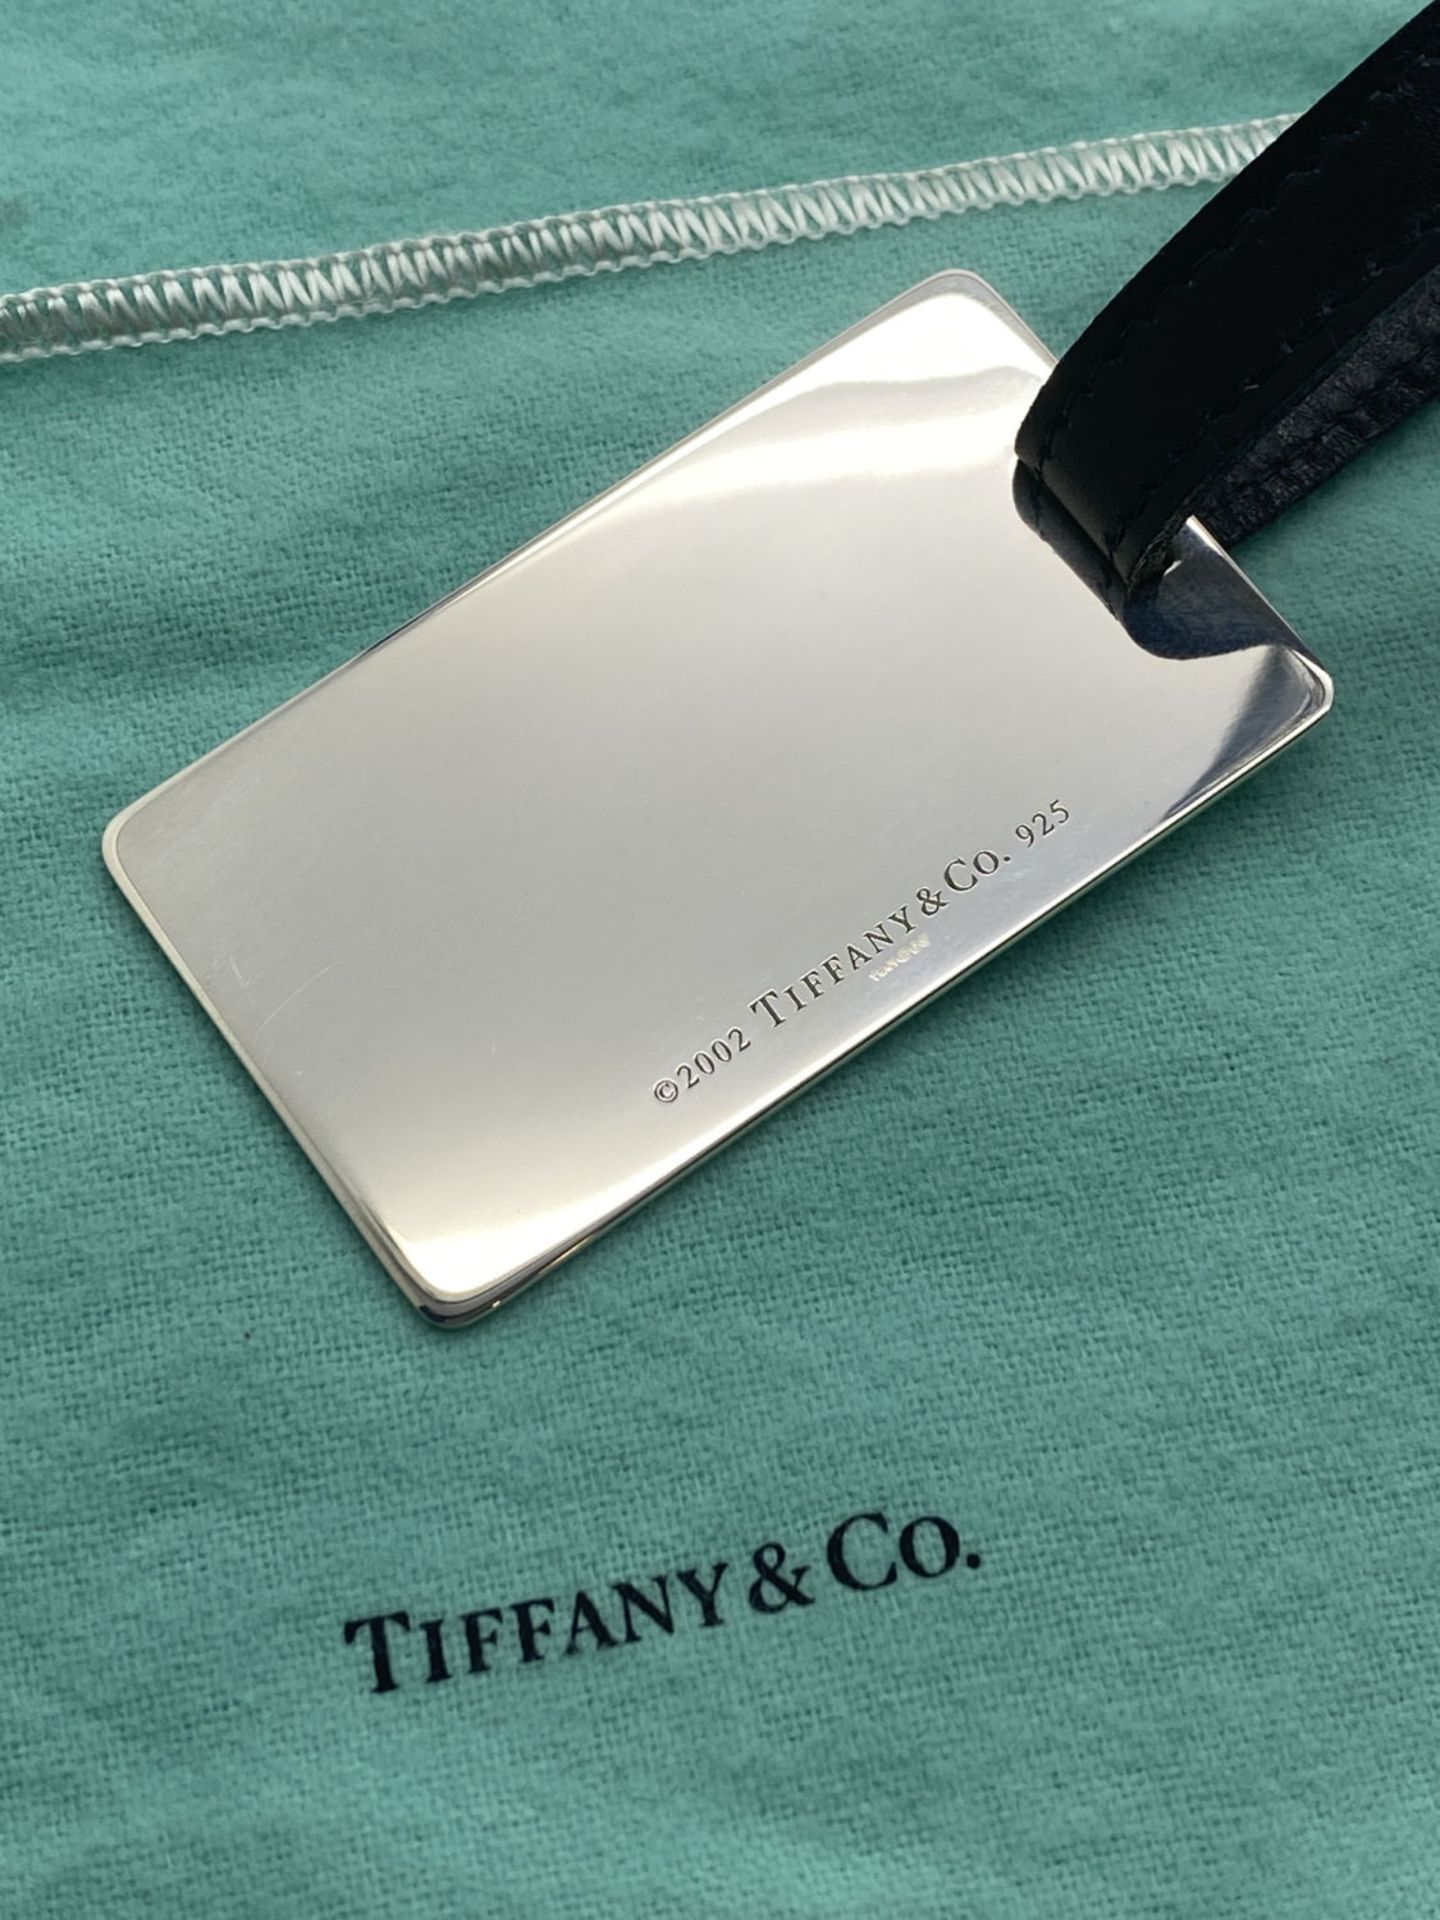 TIFFANY & CO 925 SILVER LUGGAGE TAG IN EXCELLENT CONDITION WITH TIFFANY POUCH - Image 4 of 4